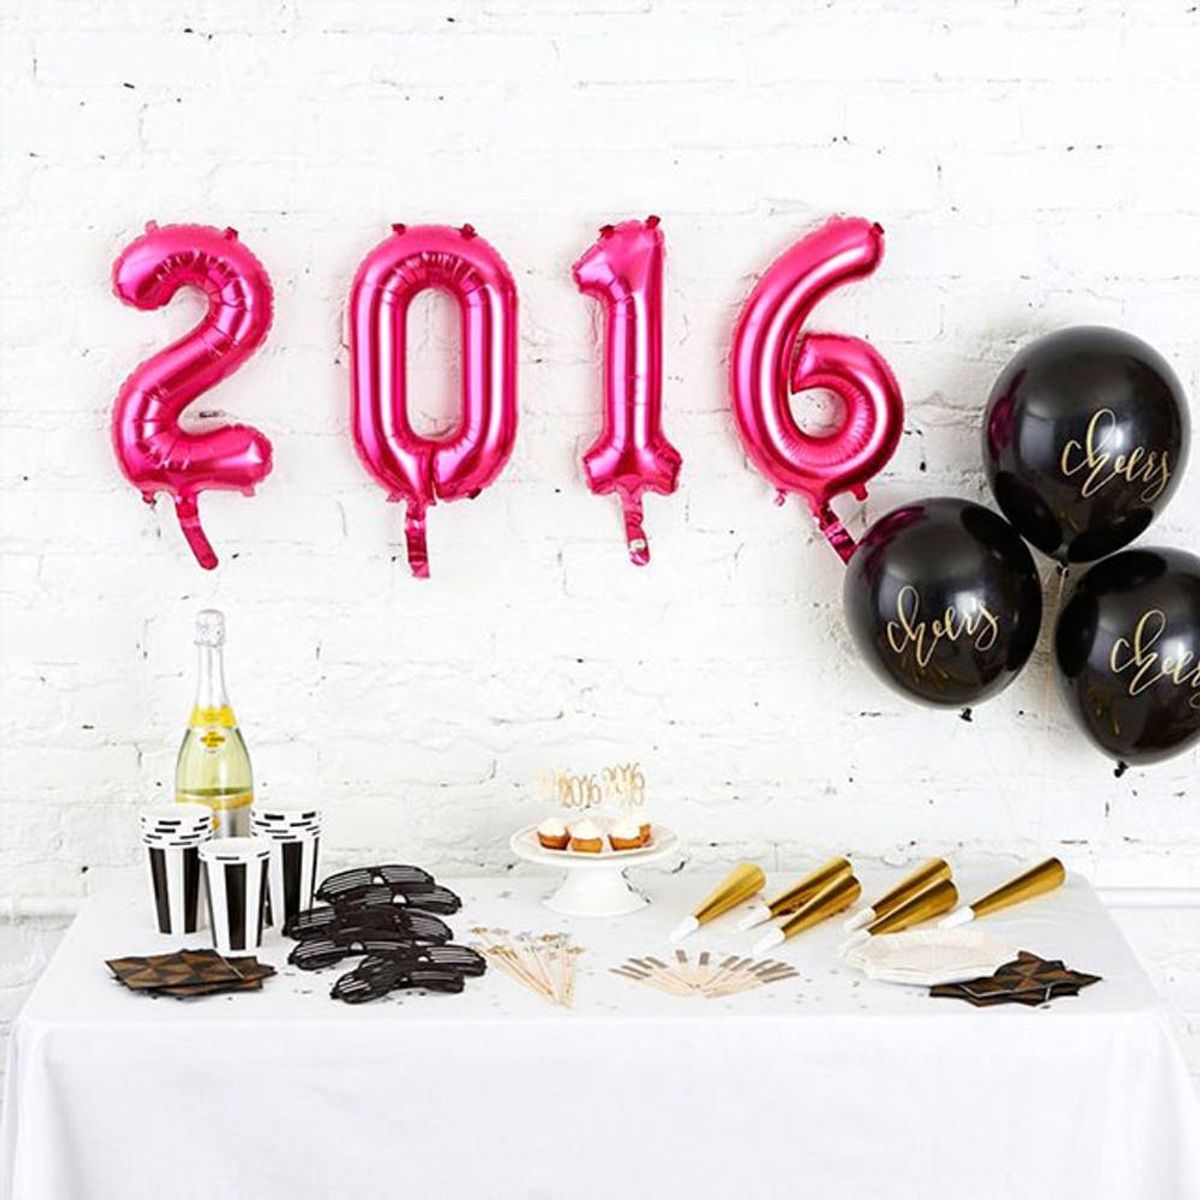 15 Balloons to Make Your New Year’s Eve Party Festive AF